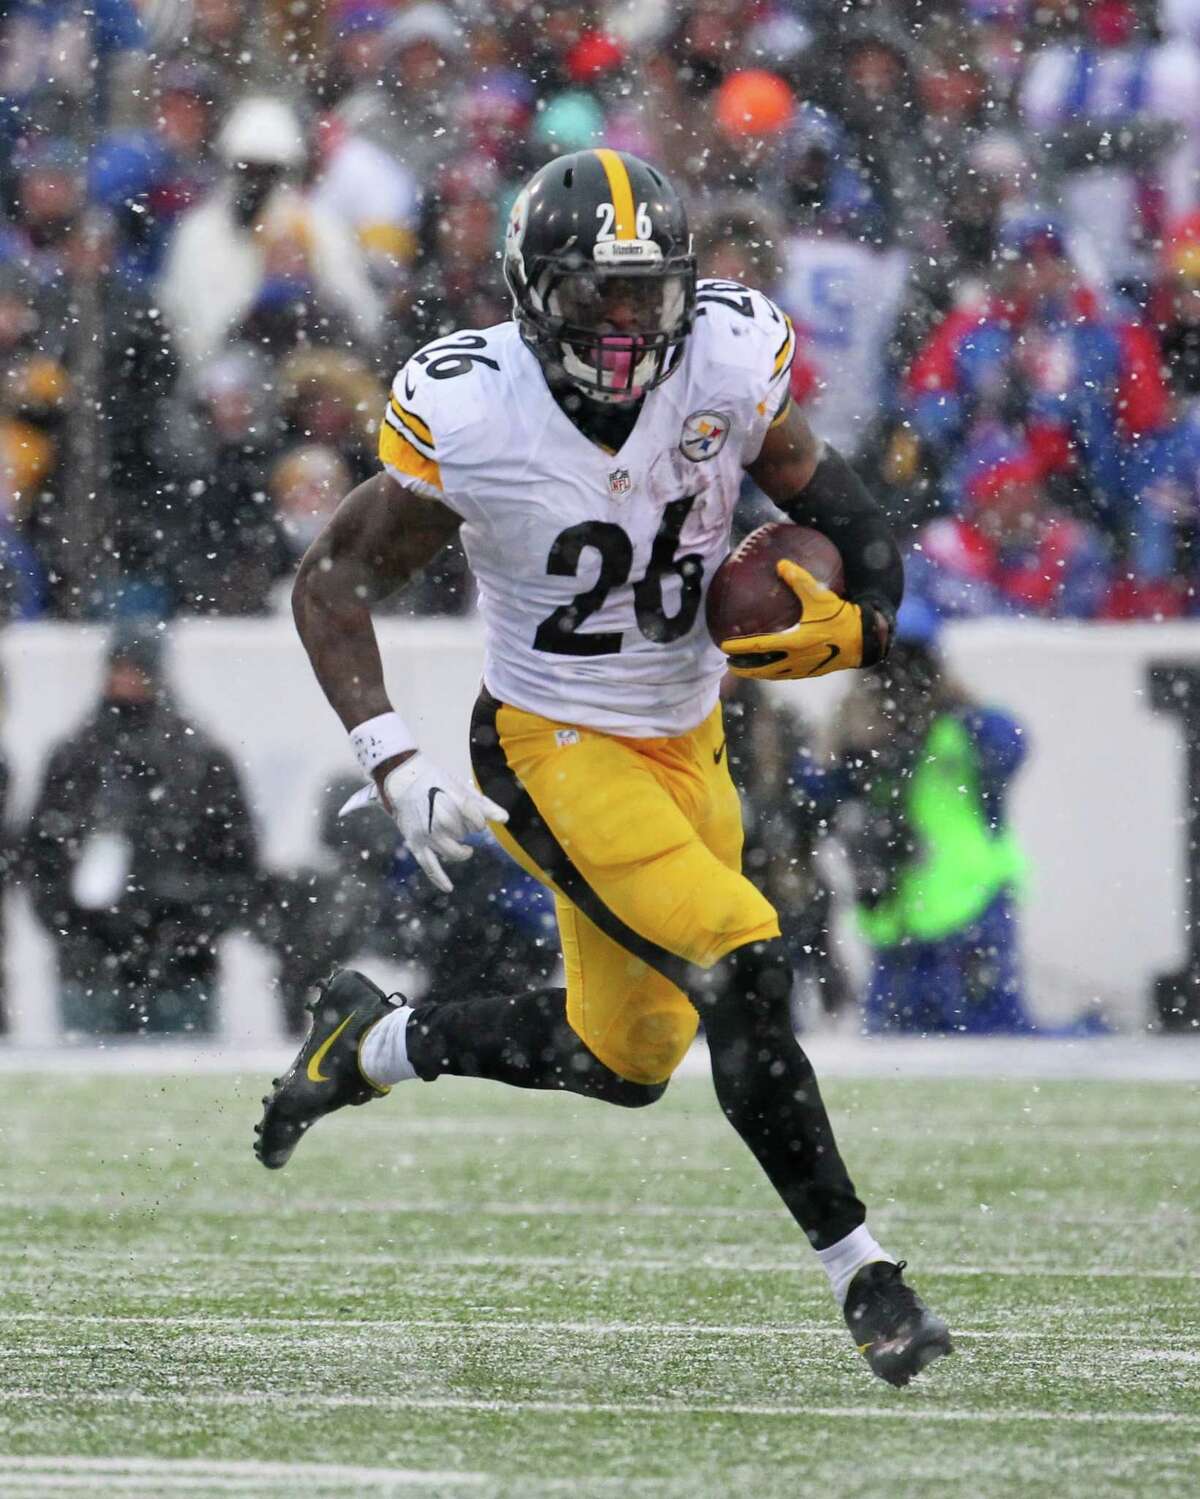 FILE - In this Dec. 11, 2016, file photo, Pittsburgh Steelers running back Le'Veon Bell (26) runs against the Buffalo Bills during the second half of an NFL football game, in Orchard Park, N.Y. NFL teams ran the ball less than ever in 2016 yet six playoff teams had a 1,000-yard rusher. Ezekiel Elliot (Cowboys), Jay Ajayi (Dolphins), Le'Veon Bell (Steelers), LeGarrette Blount (Patriots), Devonta Freeman (Falcons) and Lamar Miller (Texans) each topped 1,000 and are still playing. Last year, Adrian Peterson was the only 1,000-yard rusher in the playoffs. (AP Photo/Bill Wippert, File)